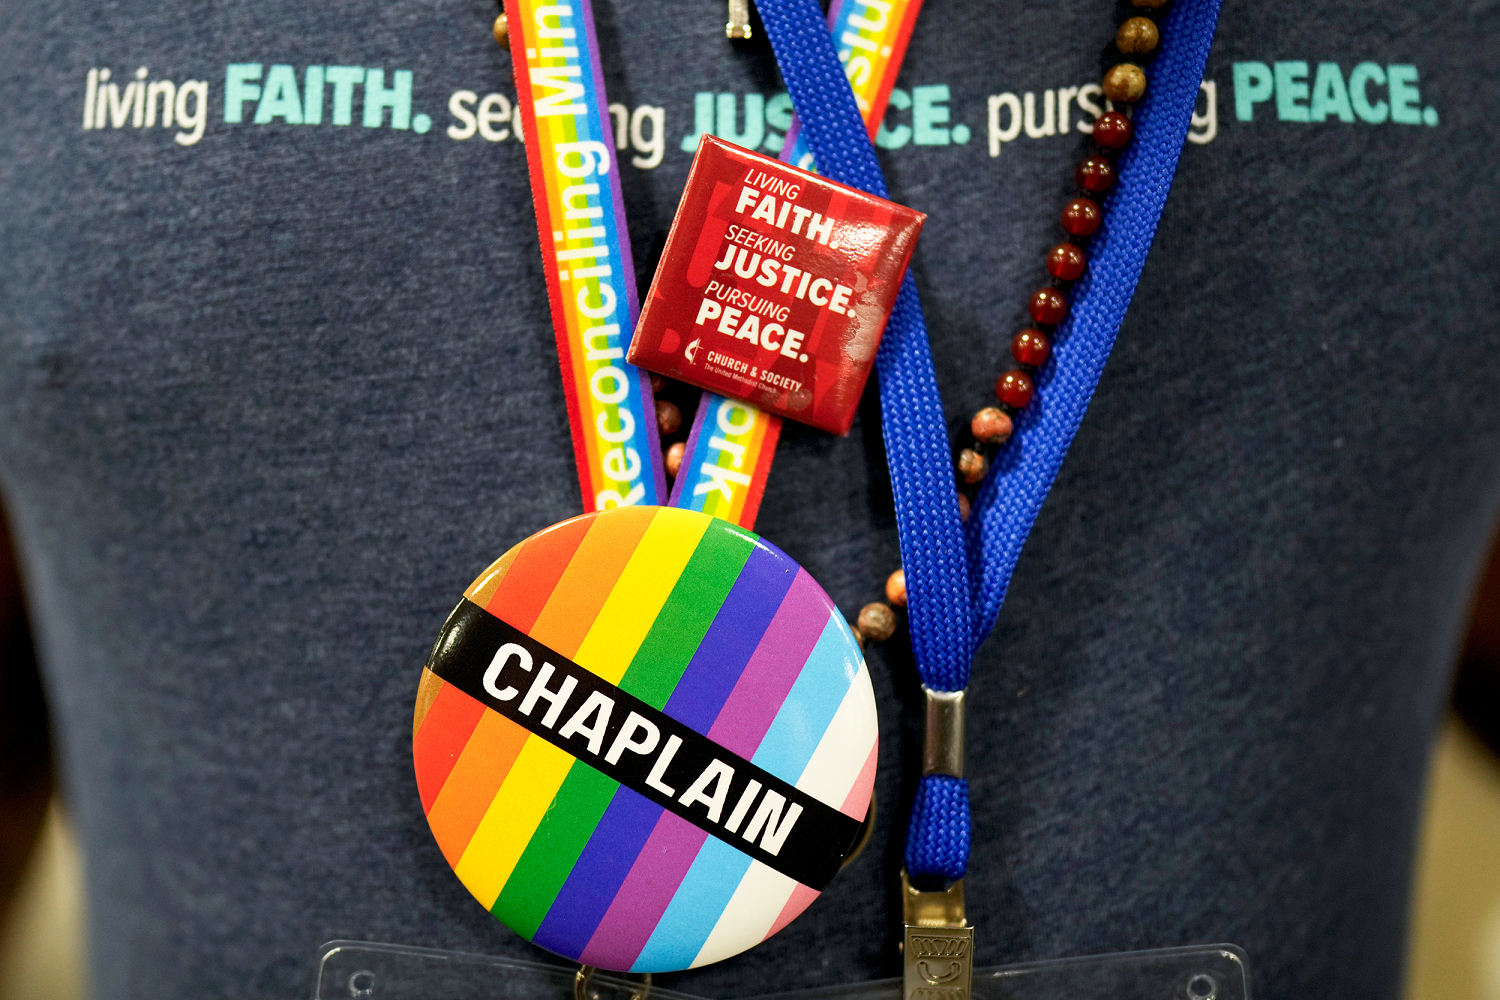 United Methodists remove anti-gay language from official teachings on societal issues